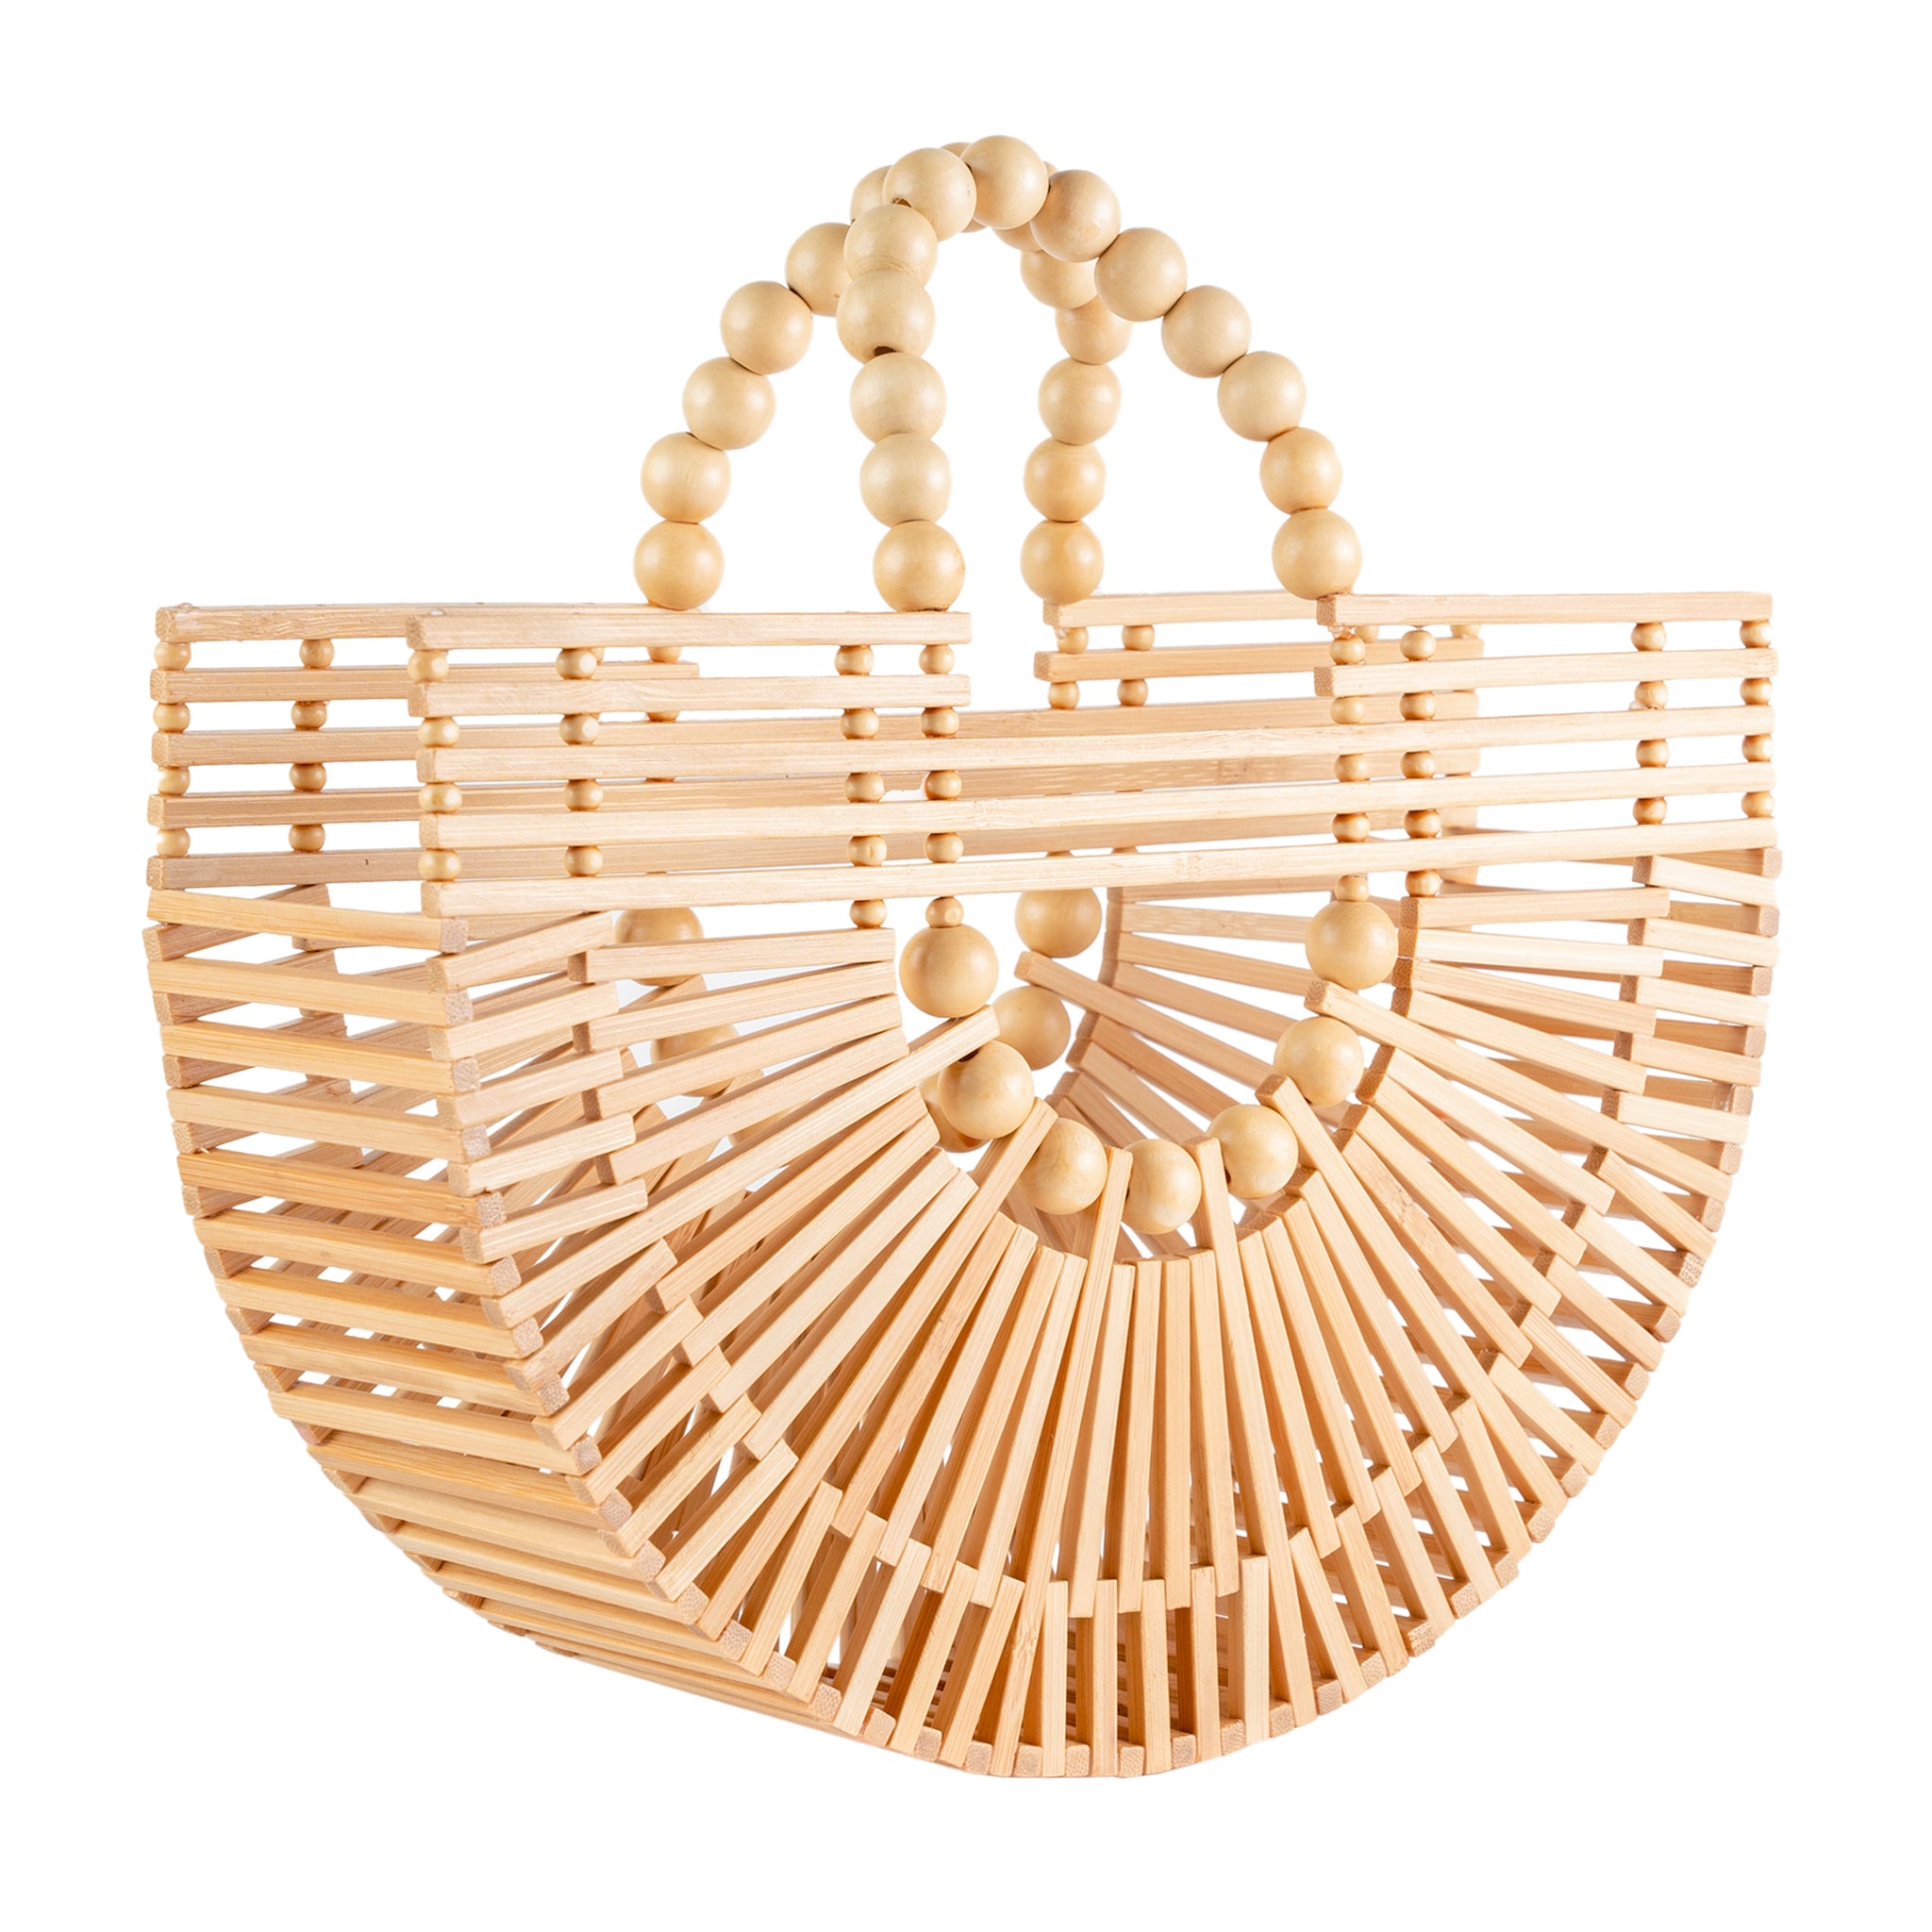 Bamboo Tote - Handcrafted Basket Bag for Women bamboo natural